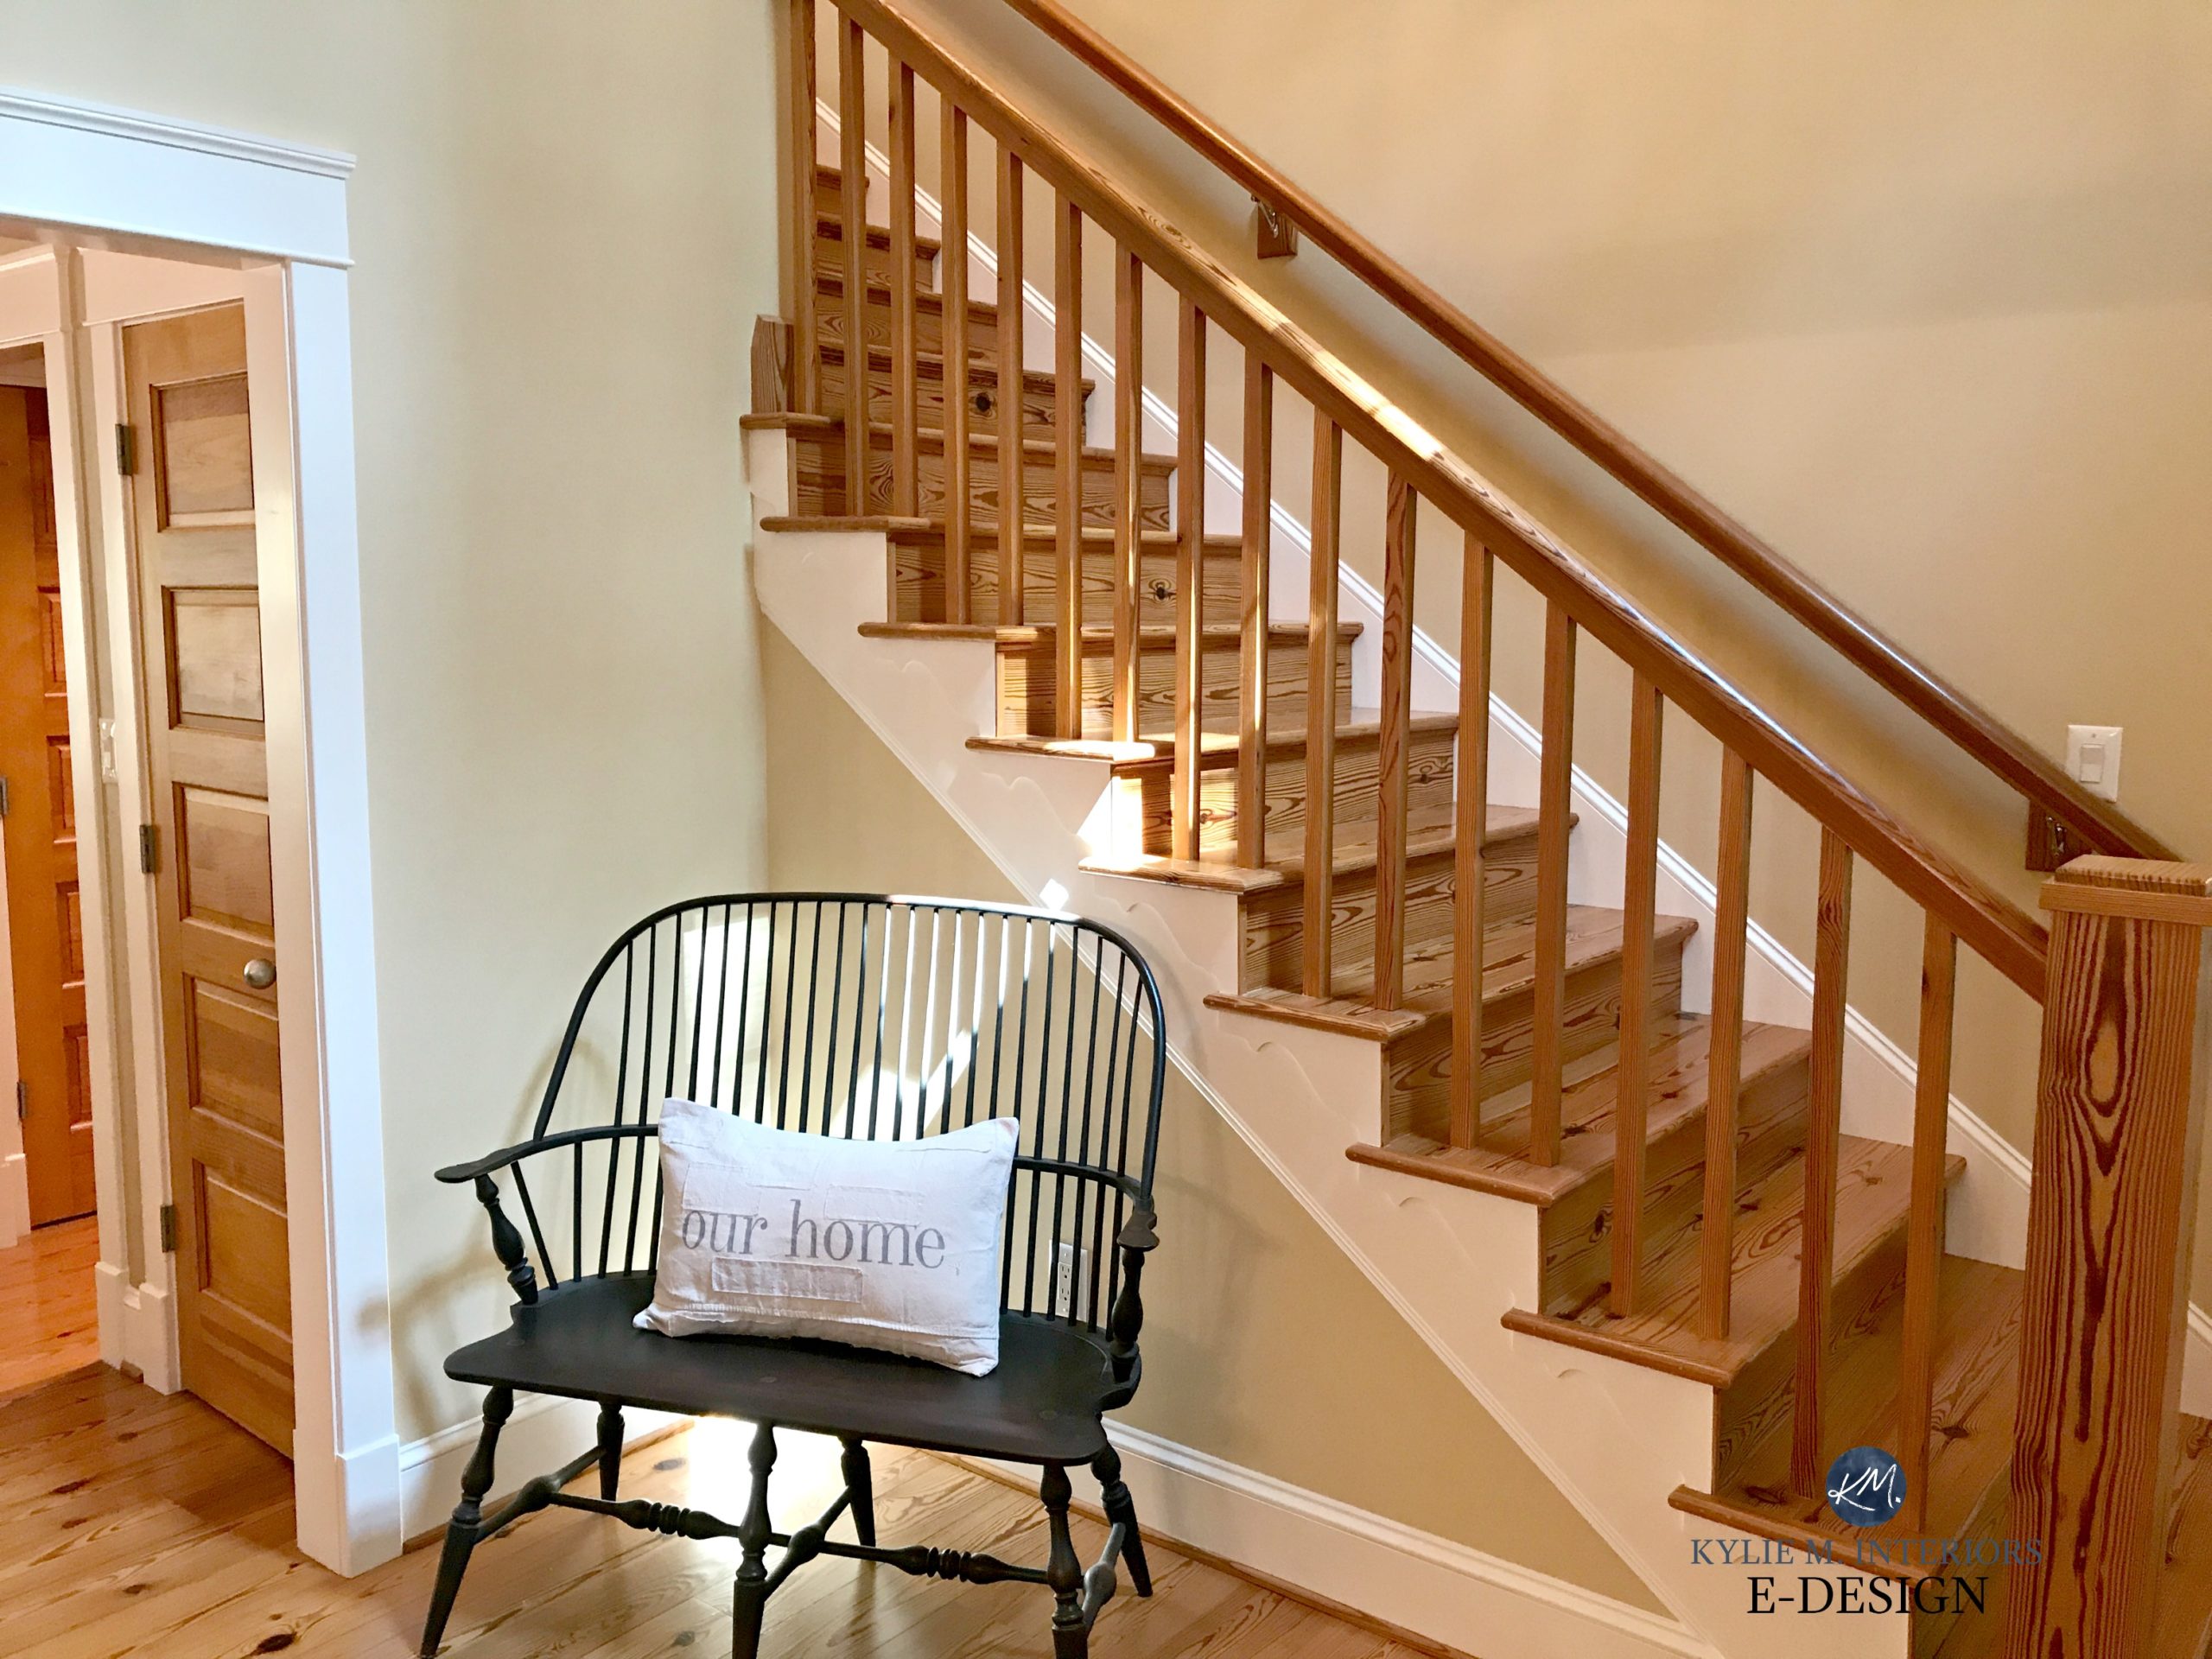 Pine and warm toned wood floor, doors, stairs and railings. Similar to oak look. Benjamin Moore Powell Buff, warm beige paint colour. Kylie M E-design, online, virtual colour consulting services